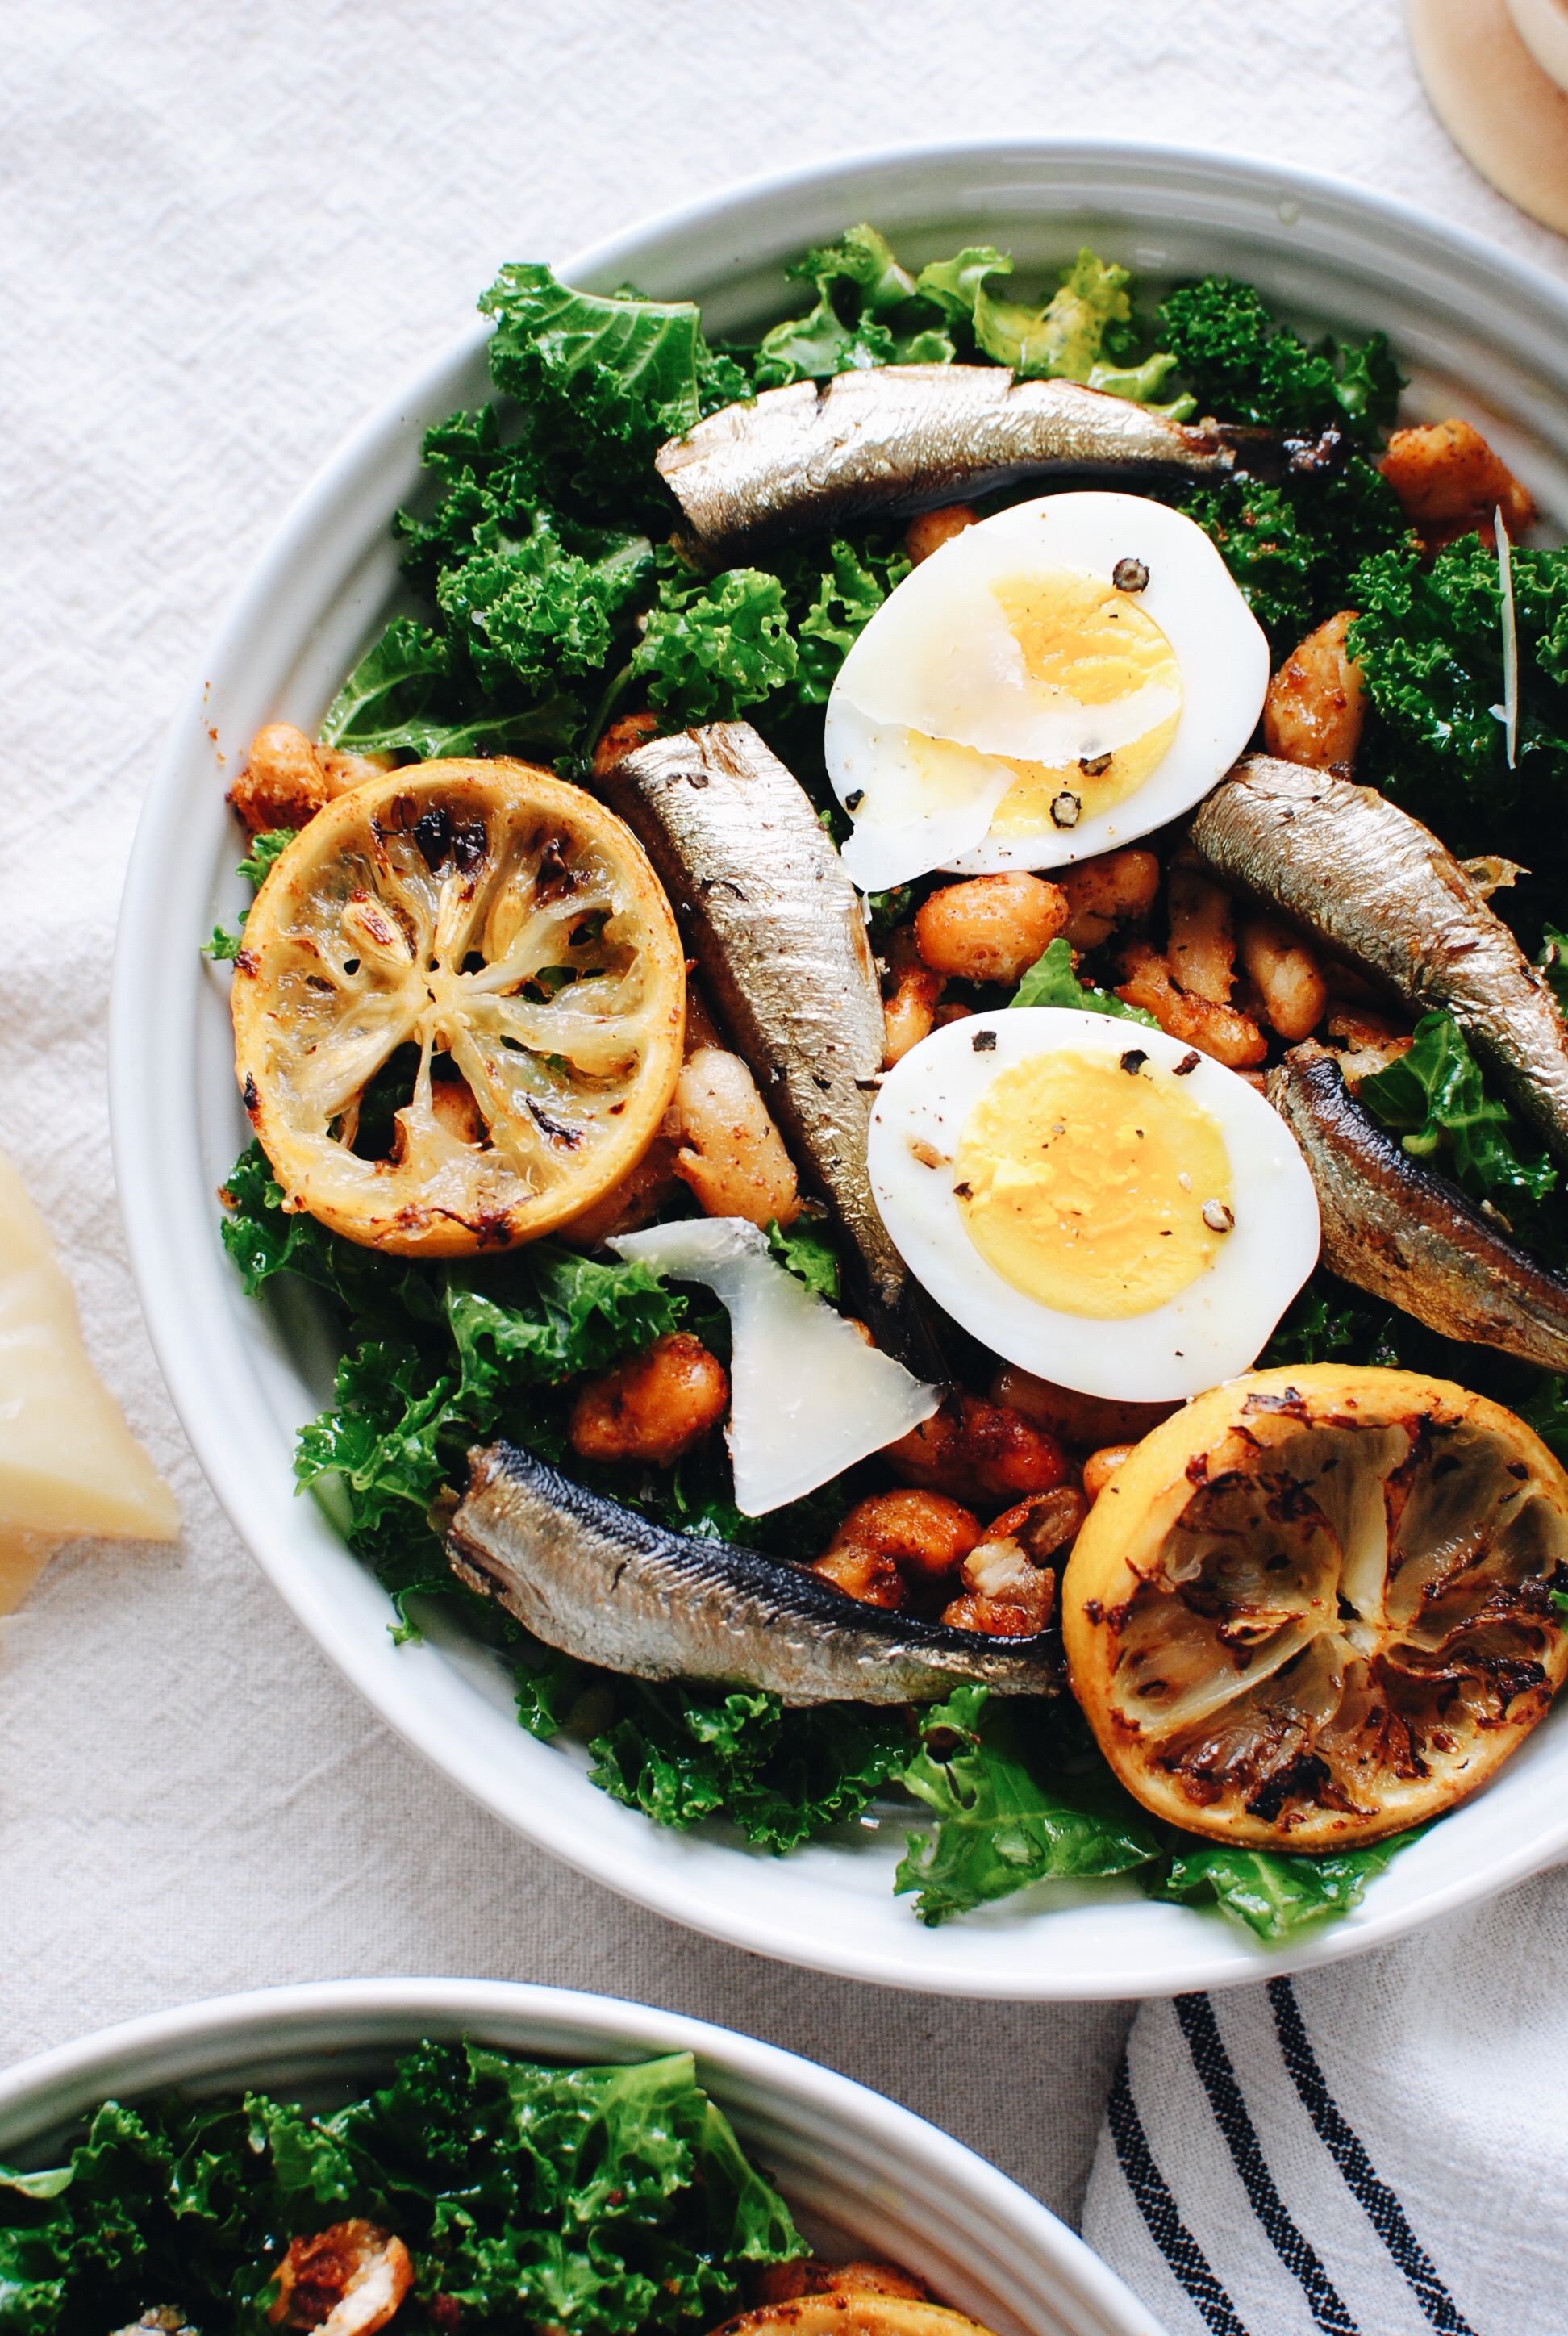 Kale Salad with Roasted Sardines and Beans / Bev Cooks